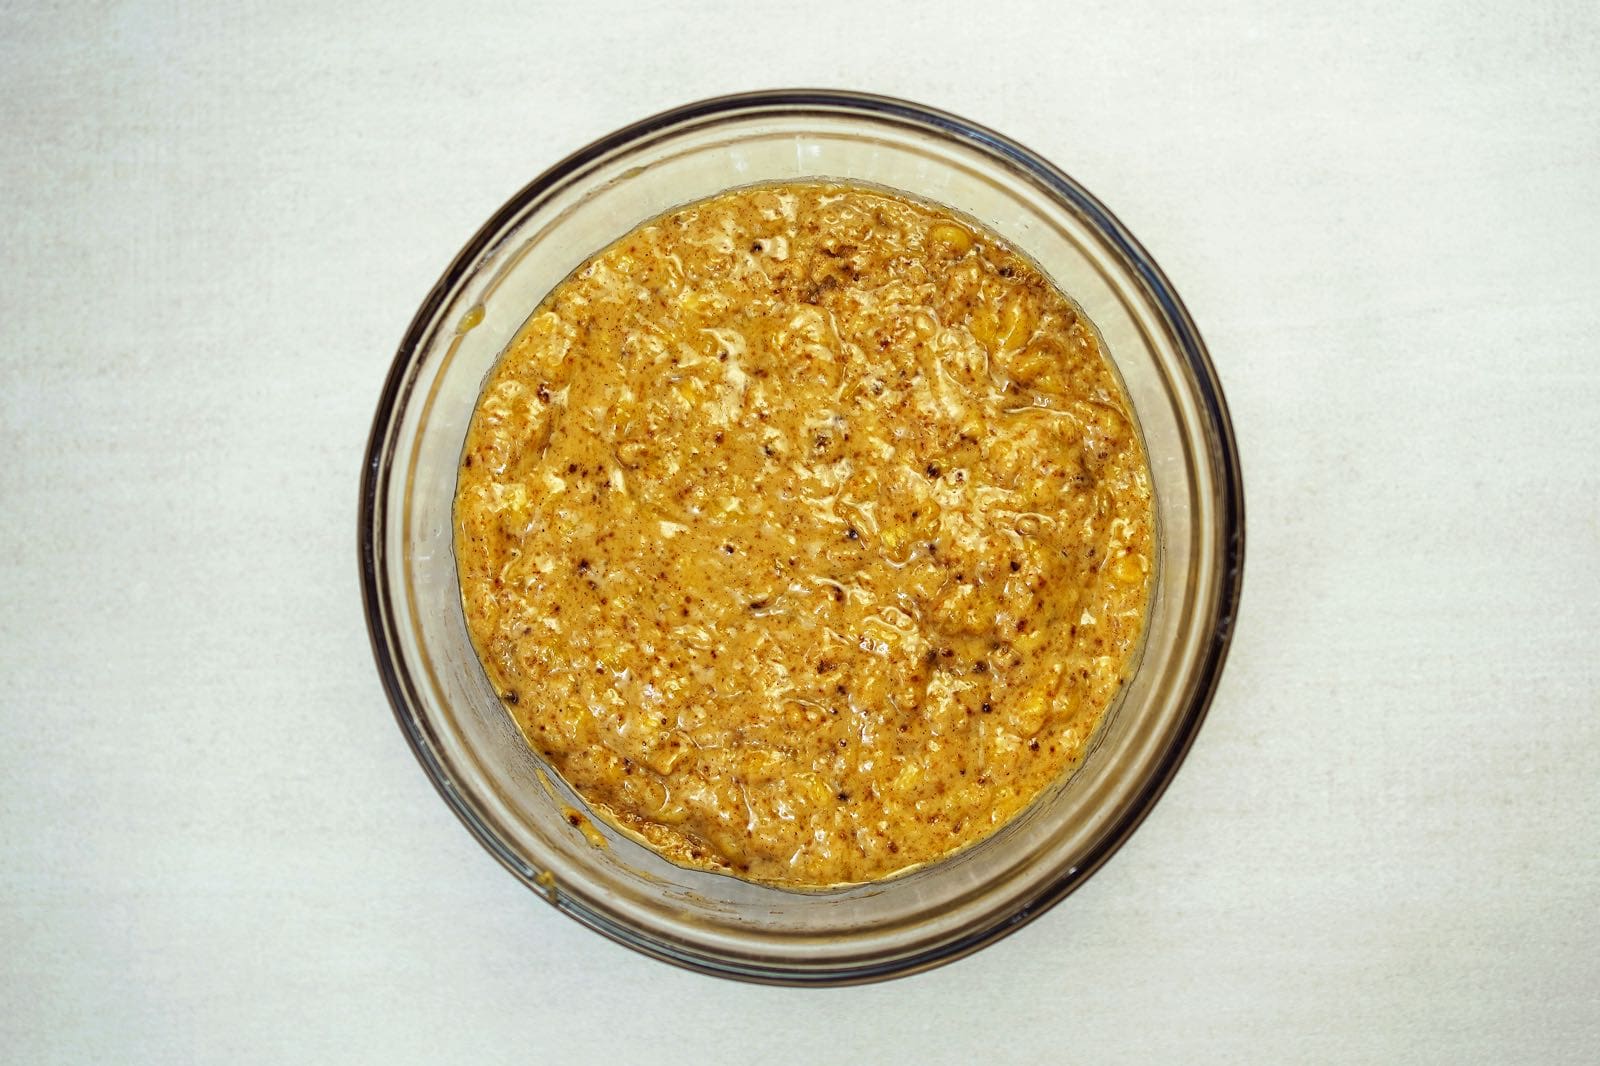 Combining banana and dry ingredients for a recipe